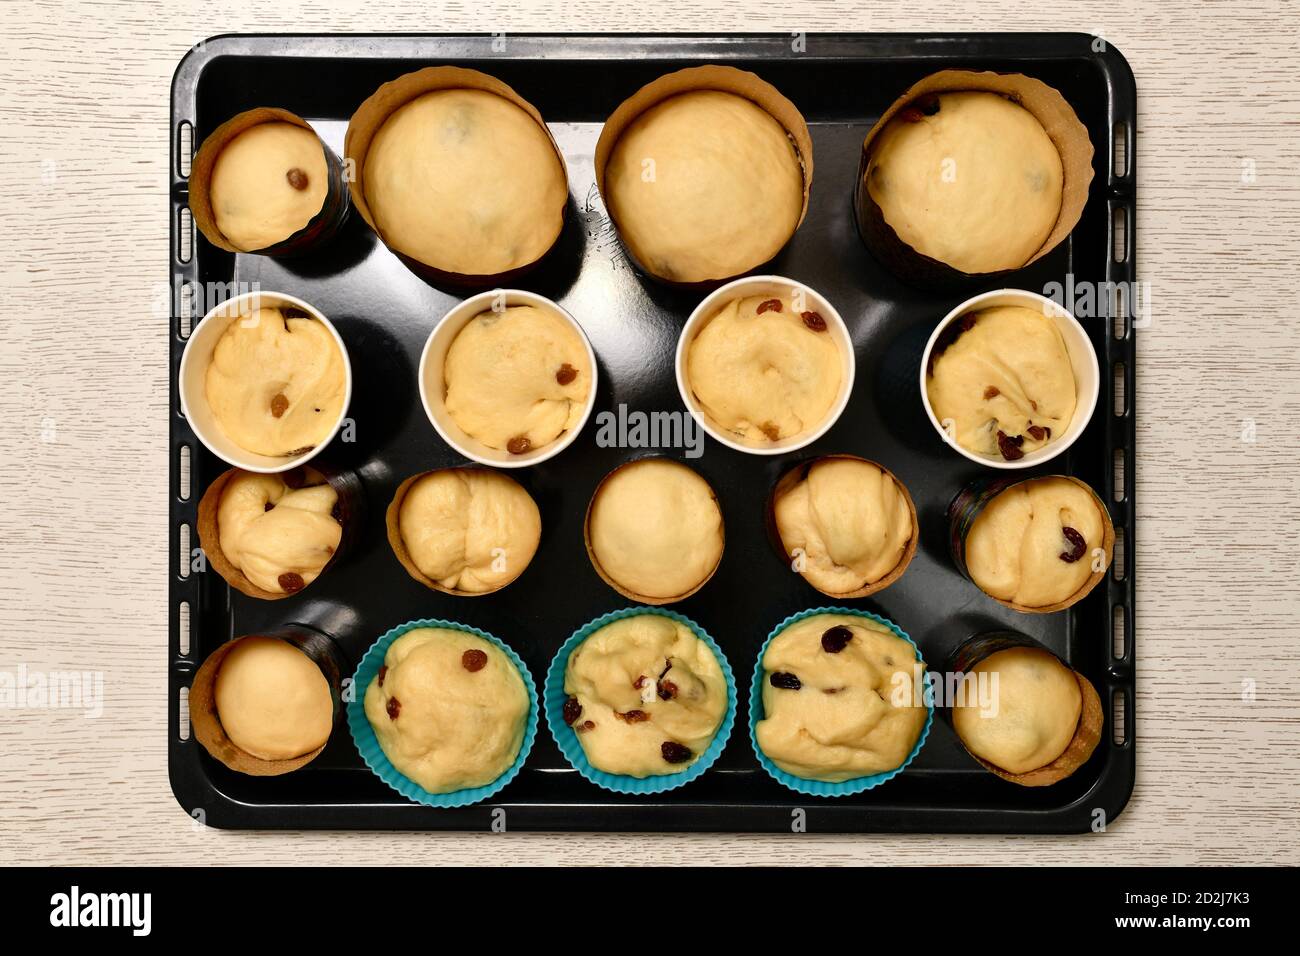 Shapes with rising yeast dough, seasoned with raisins. Cooking Easter cakes. The process fermentation in baking molds. Stock Photo